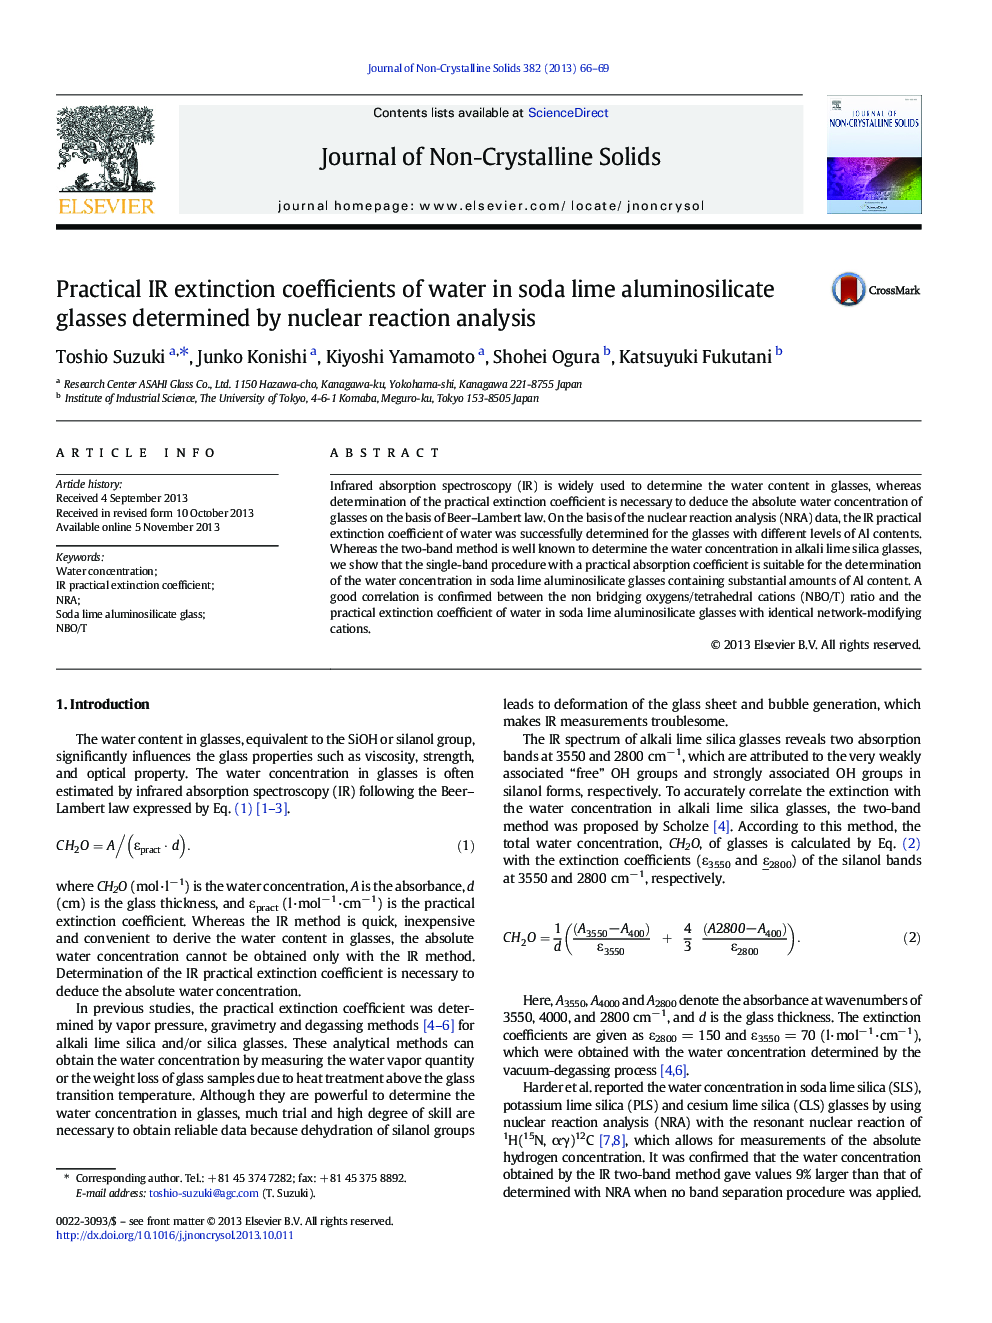 Practical IR extinction coefficients of water in soda lime aluminosilicate glasses determined by nuclear reaction analysis